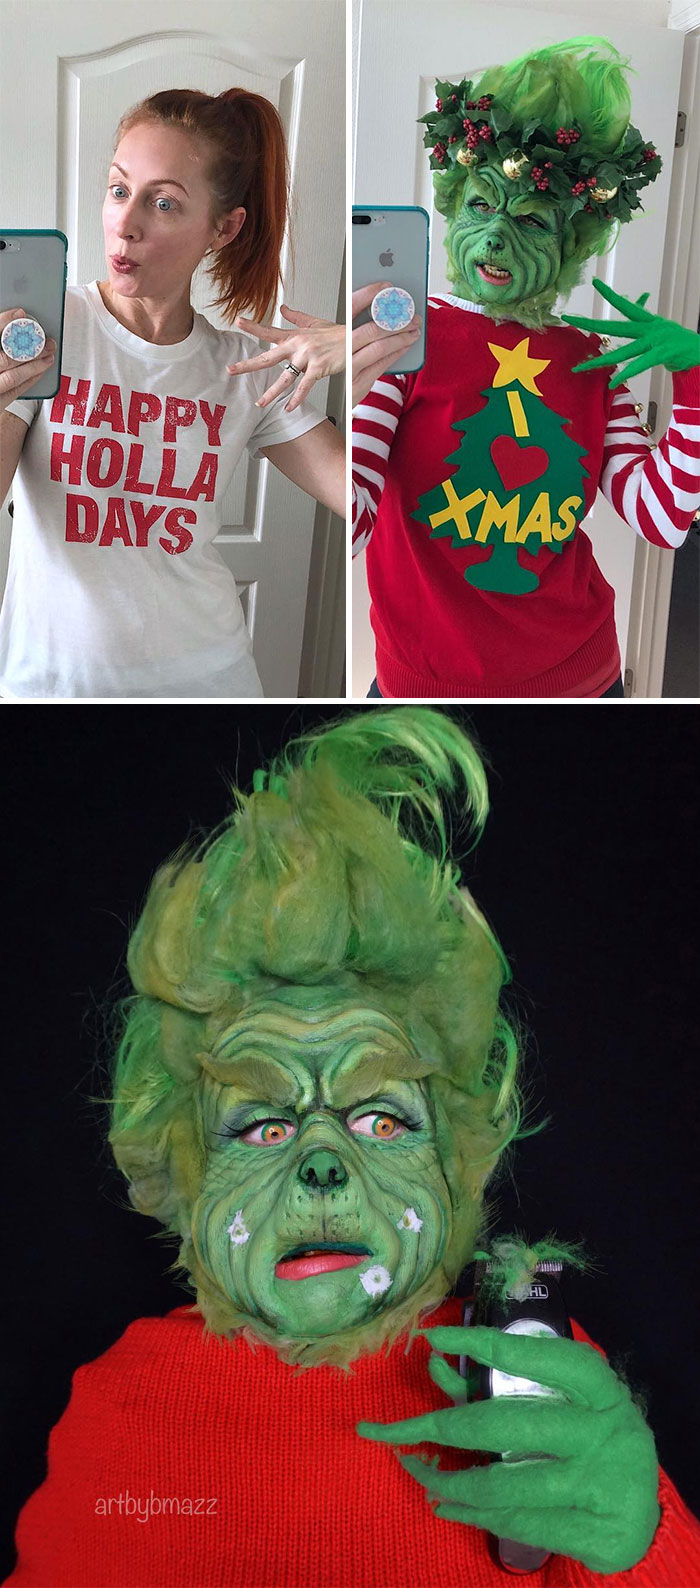 Grinch (How The Grinch Stole Christmas)